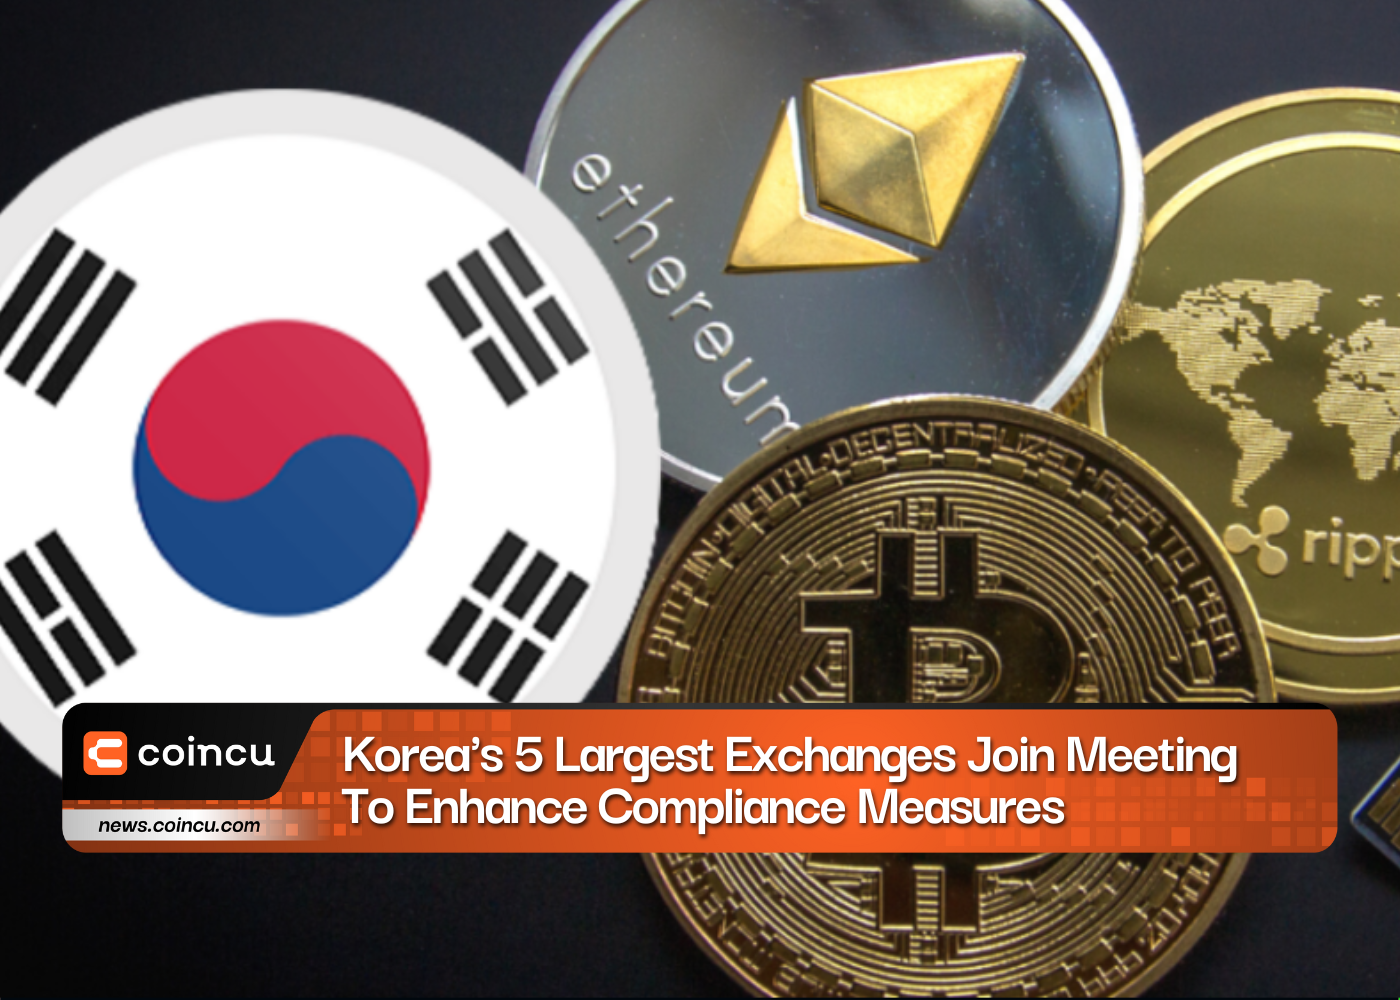 Korea's 5 Largest Exchanges Join Meeting To Enhance Compliance Measures